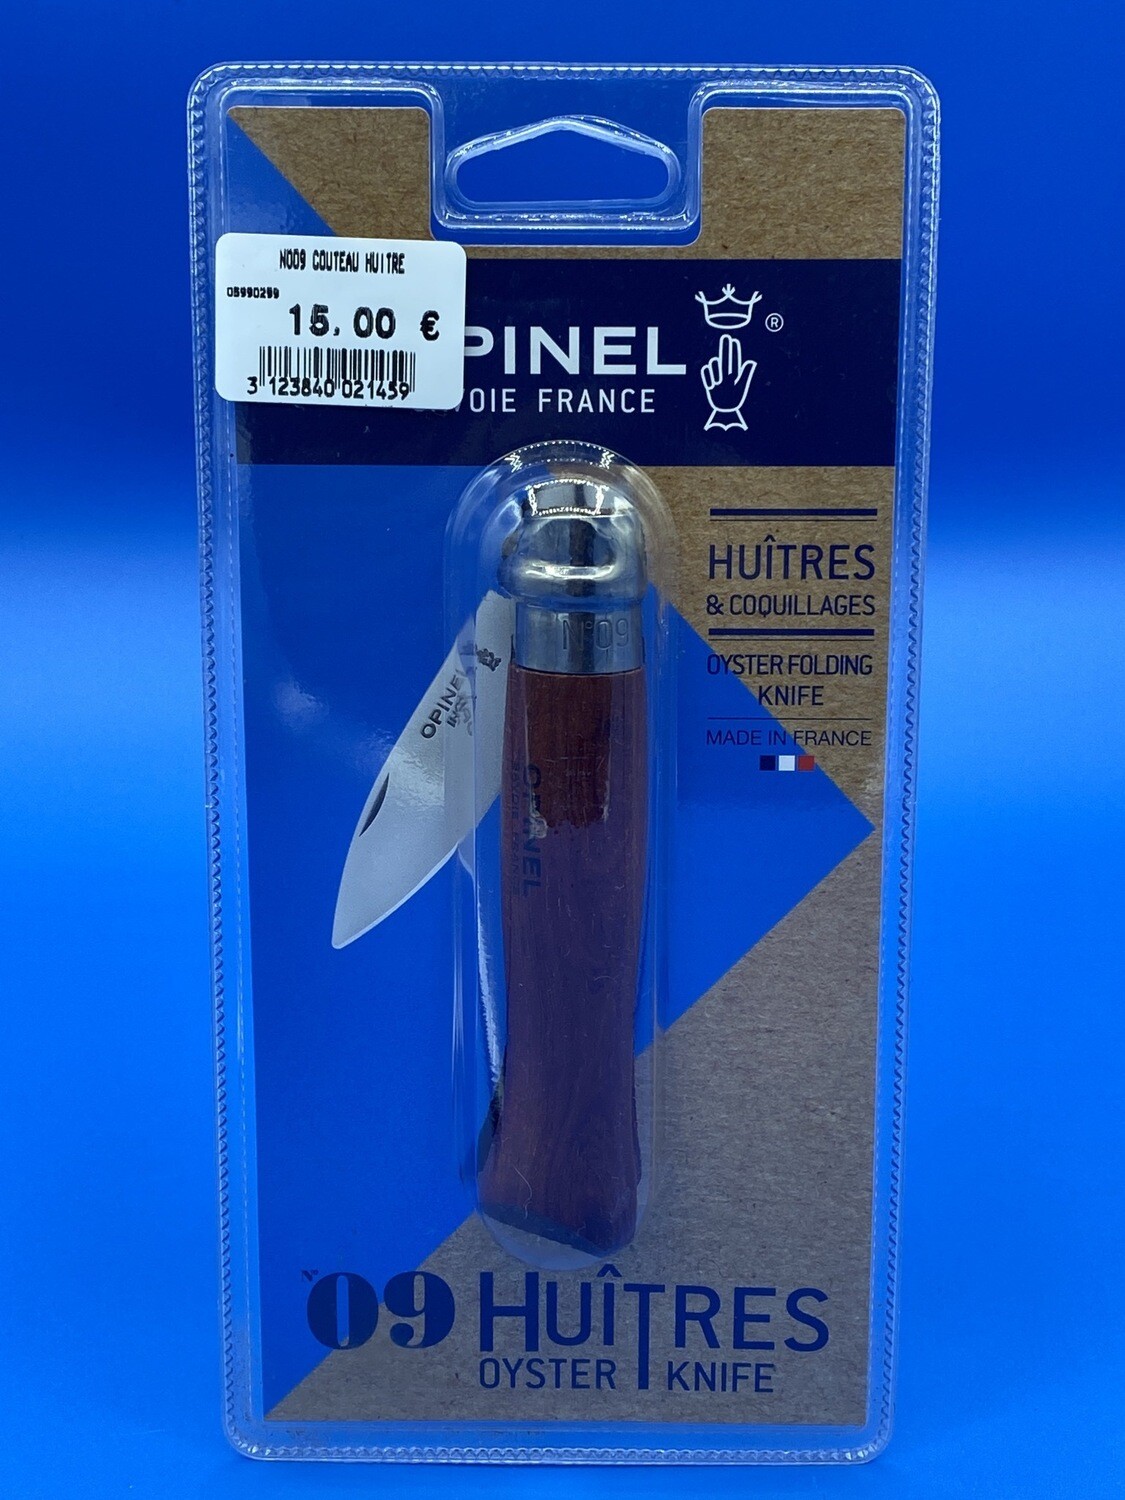 Opinel N°9 couteau à huîtres et coquillages Made in France